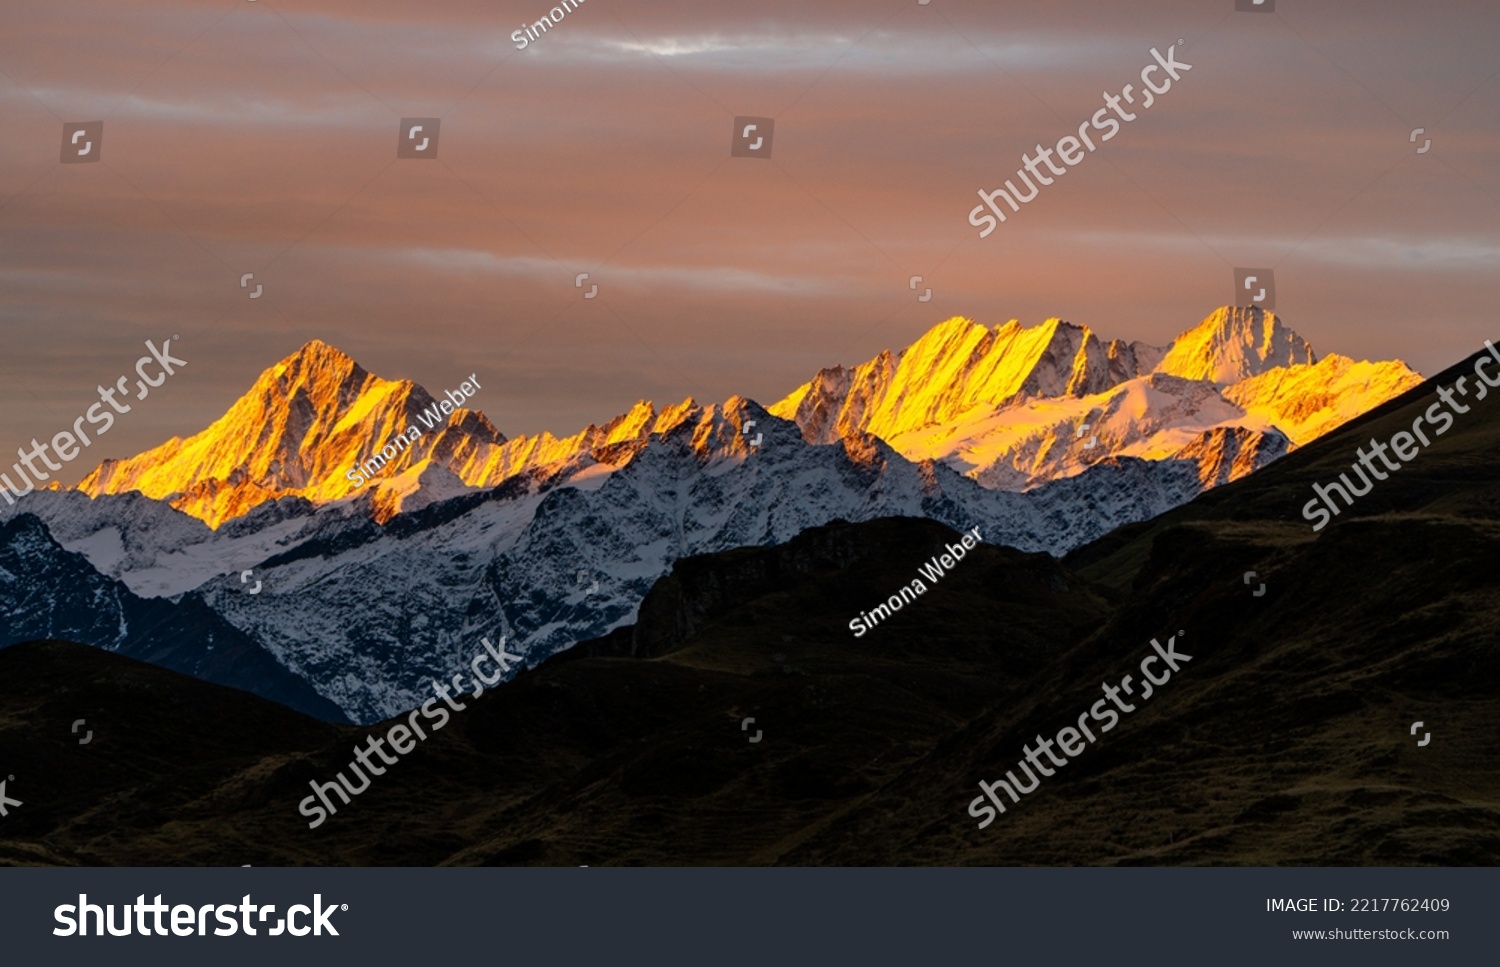 Sunrise with colourful snow peaks early morning in the Swiss alps, layers of mountains on a nice autumn day #2217762409